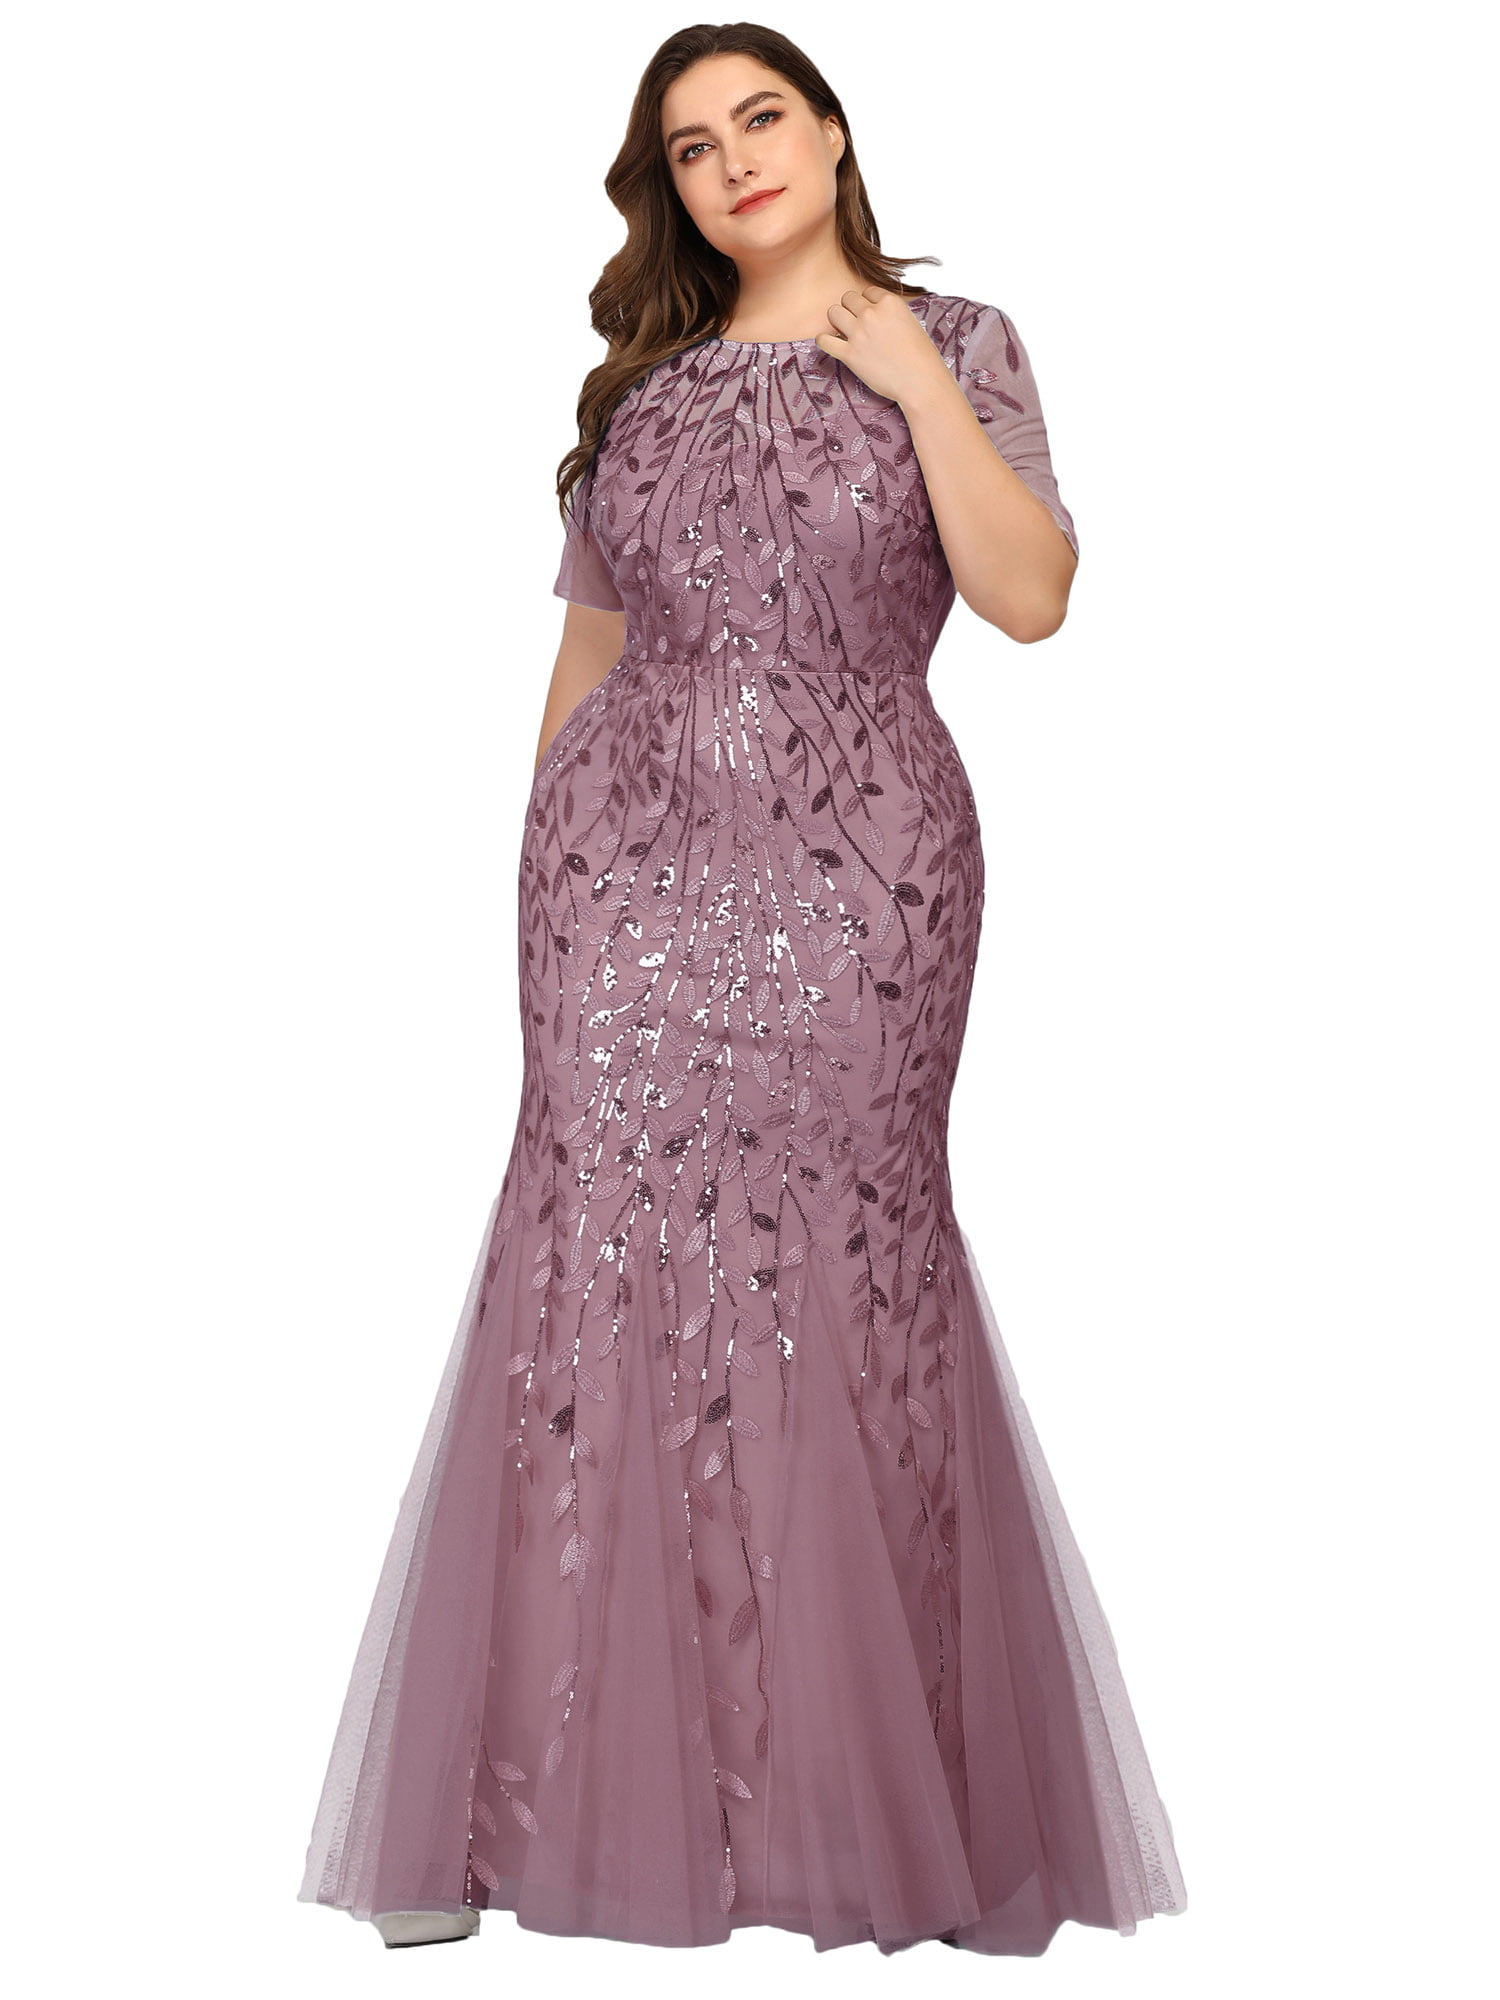 Ever-Pretty Plus Size Long Evening Party Dress Bodycon Mermaid Wedding Ball Gown